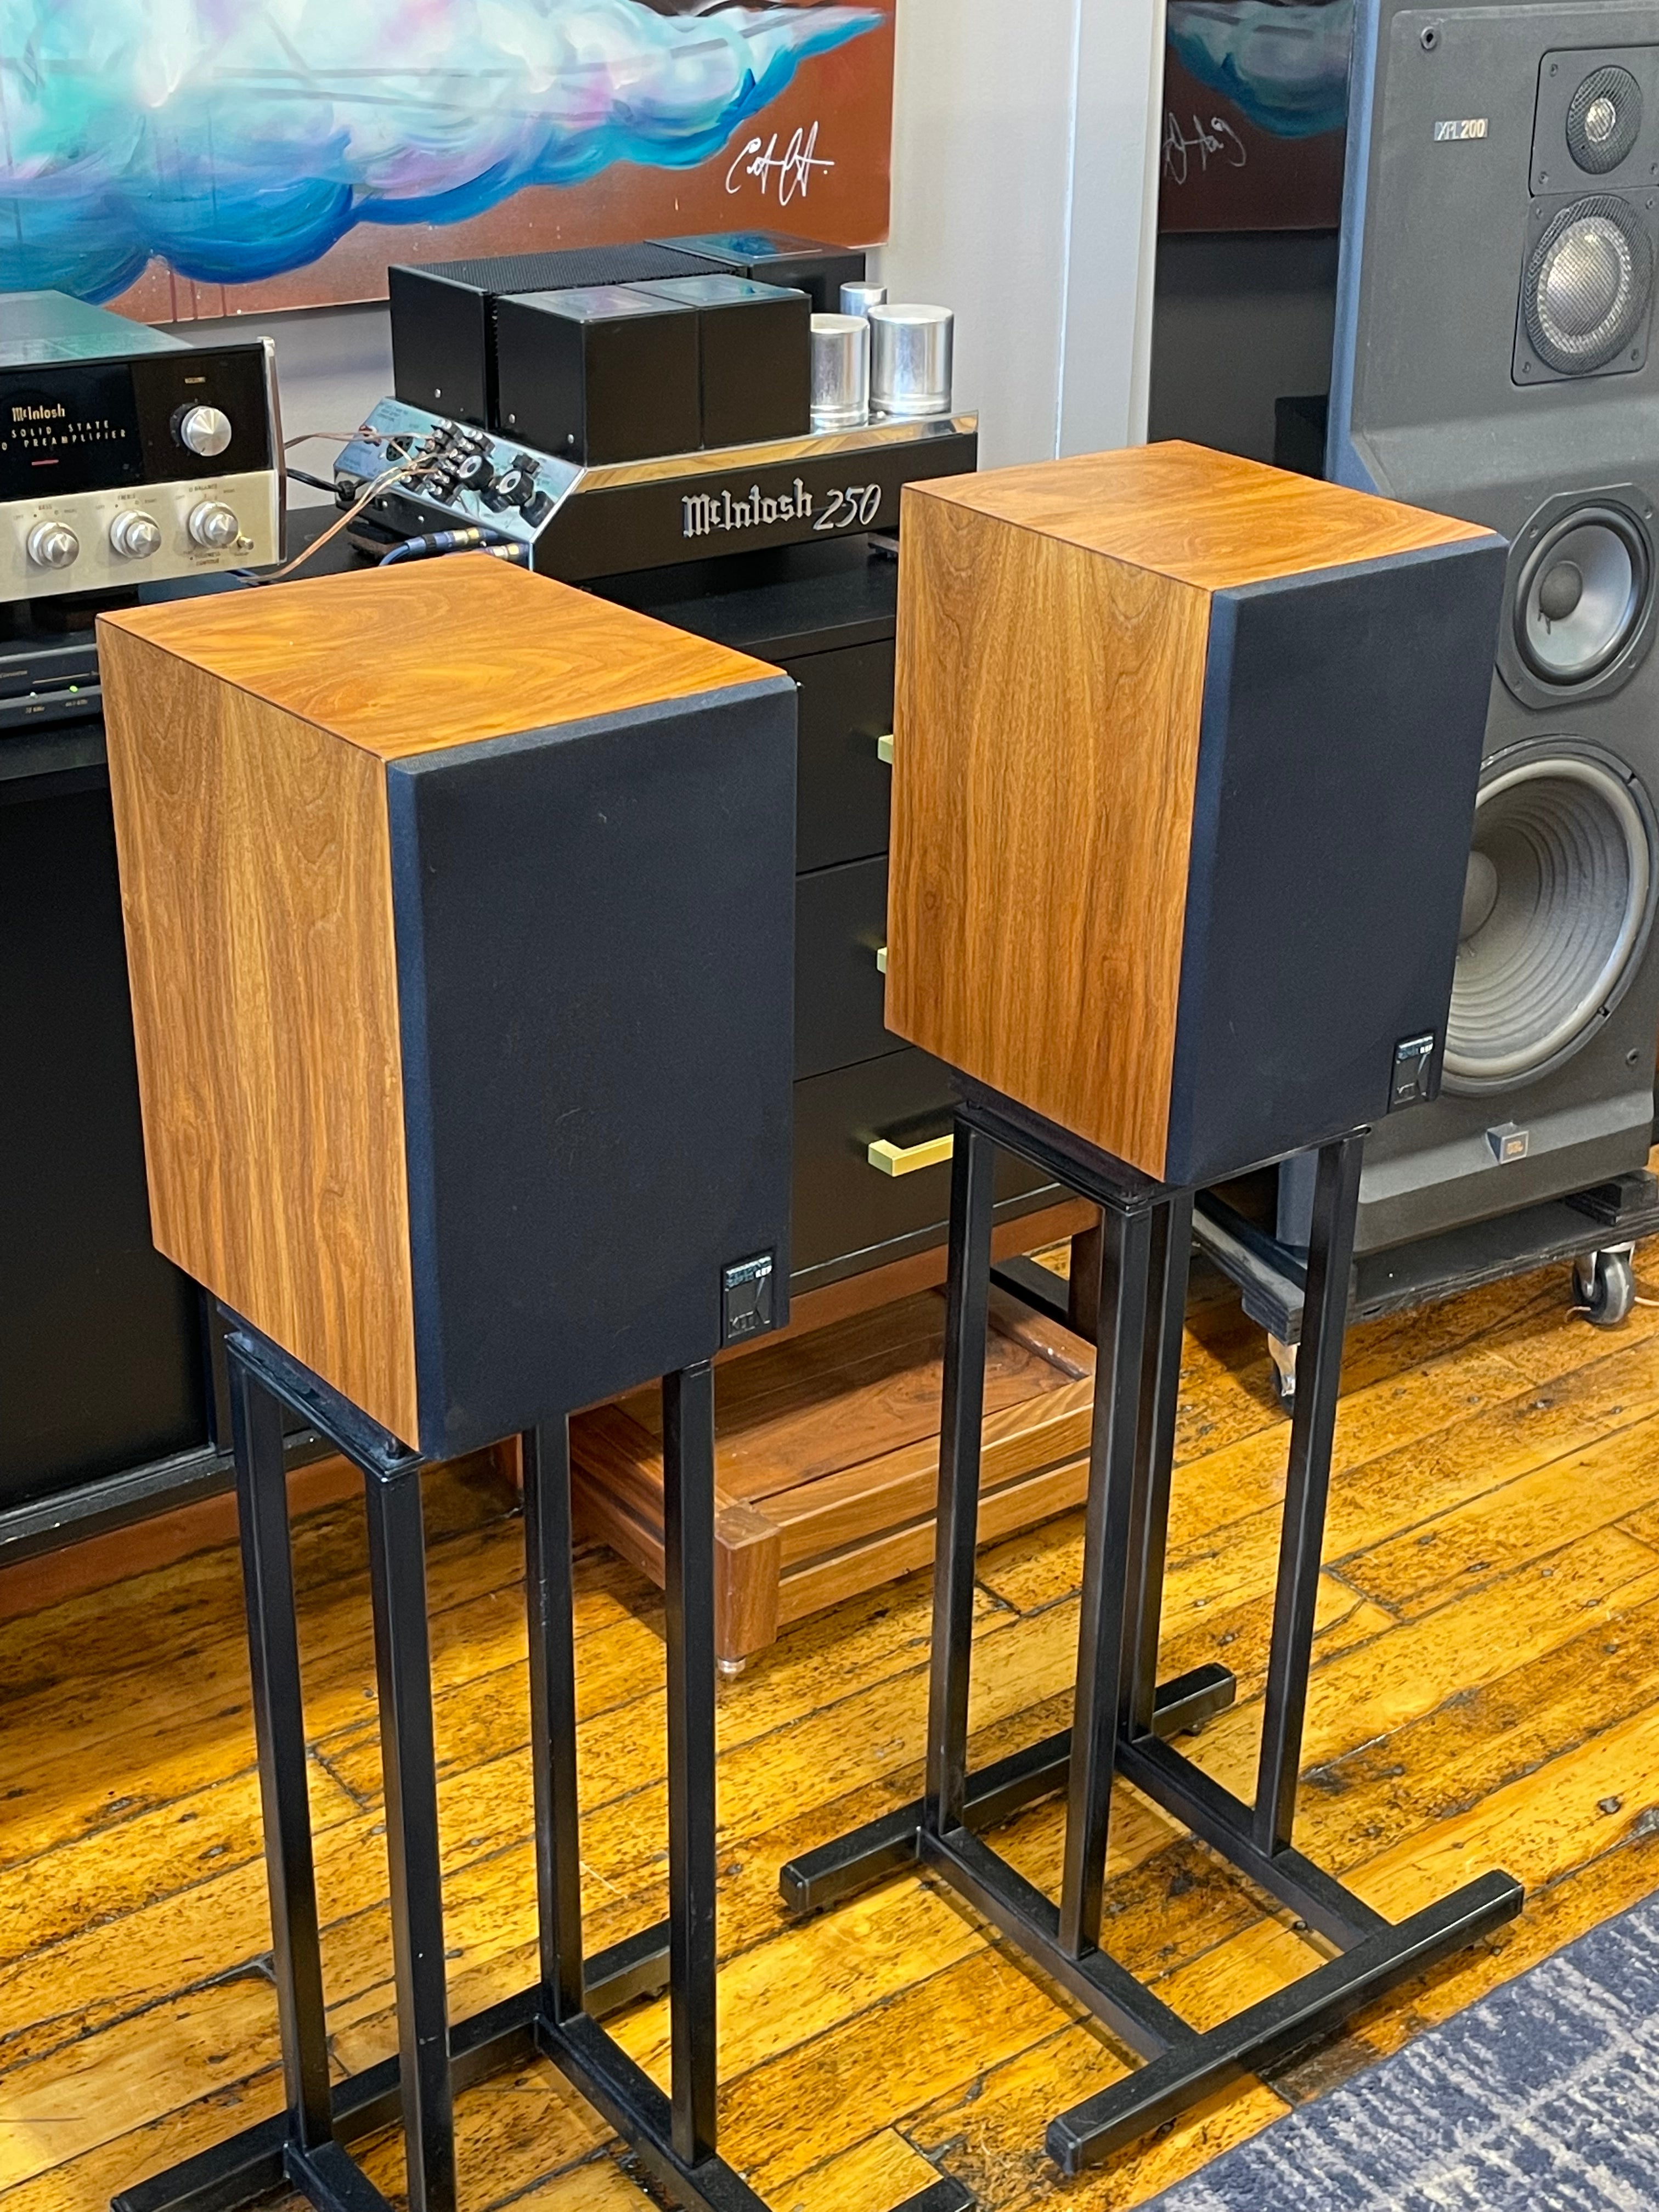 KEF Reference 102 Standmount Speakers - SOLD